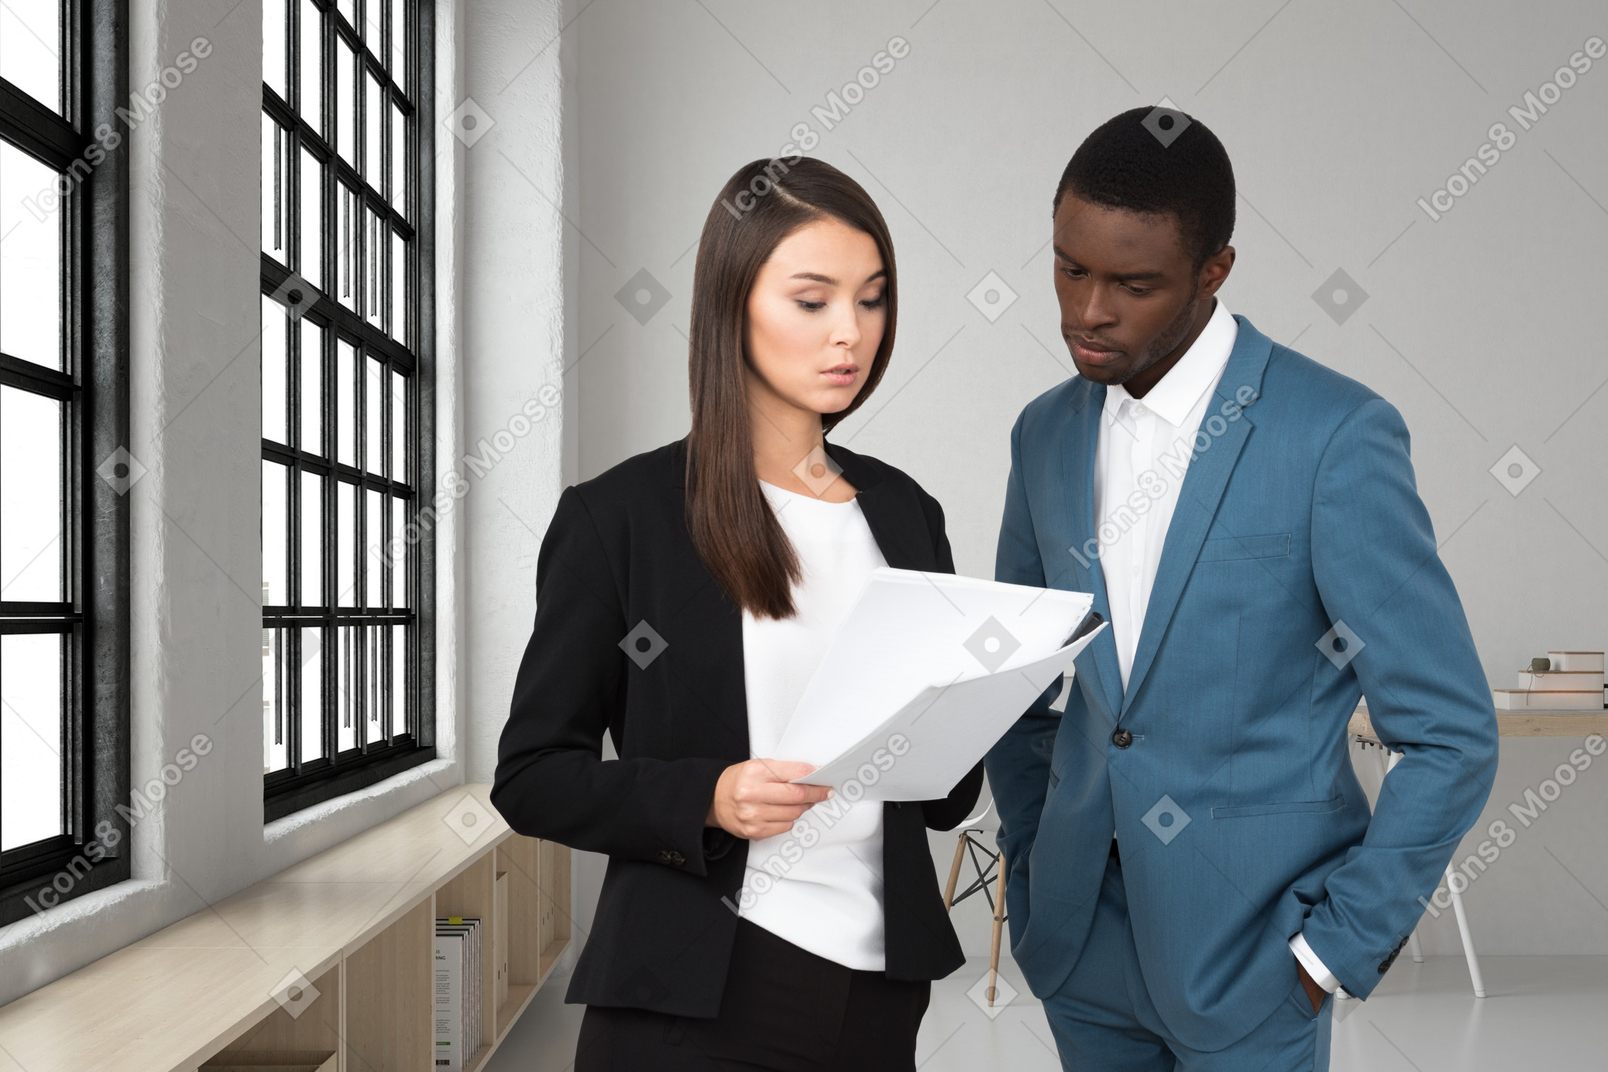 A man and a woman looking at a piece of paper